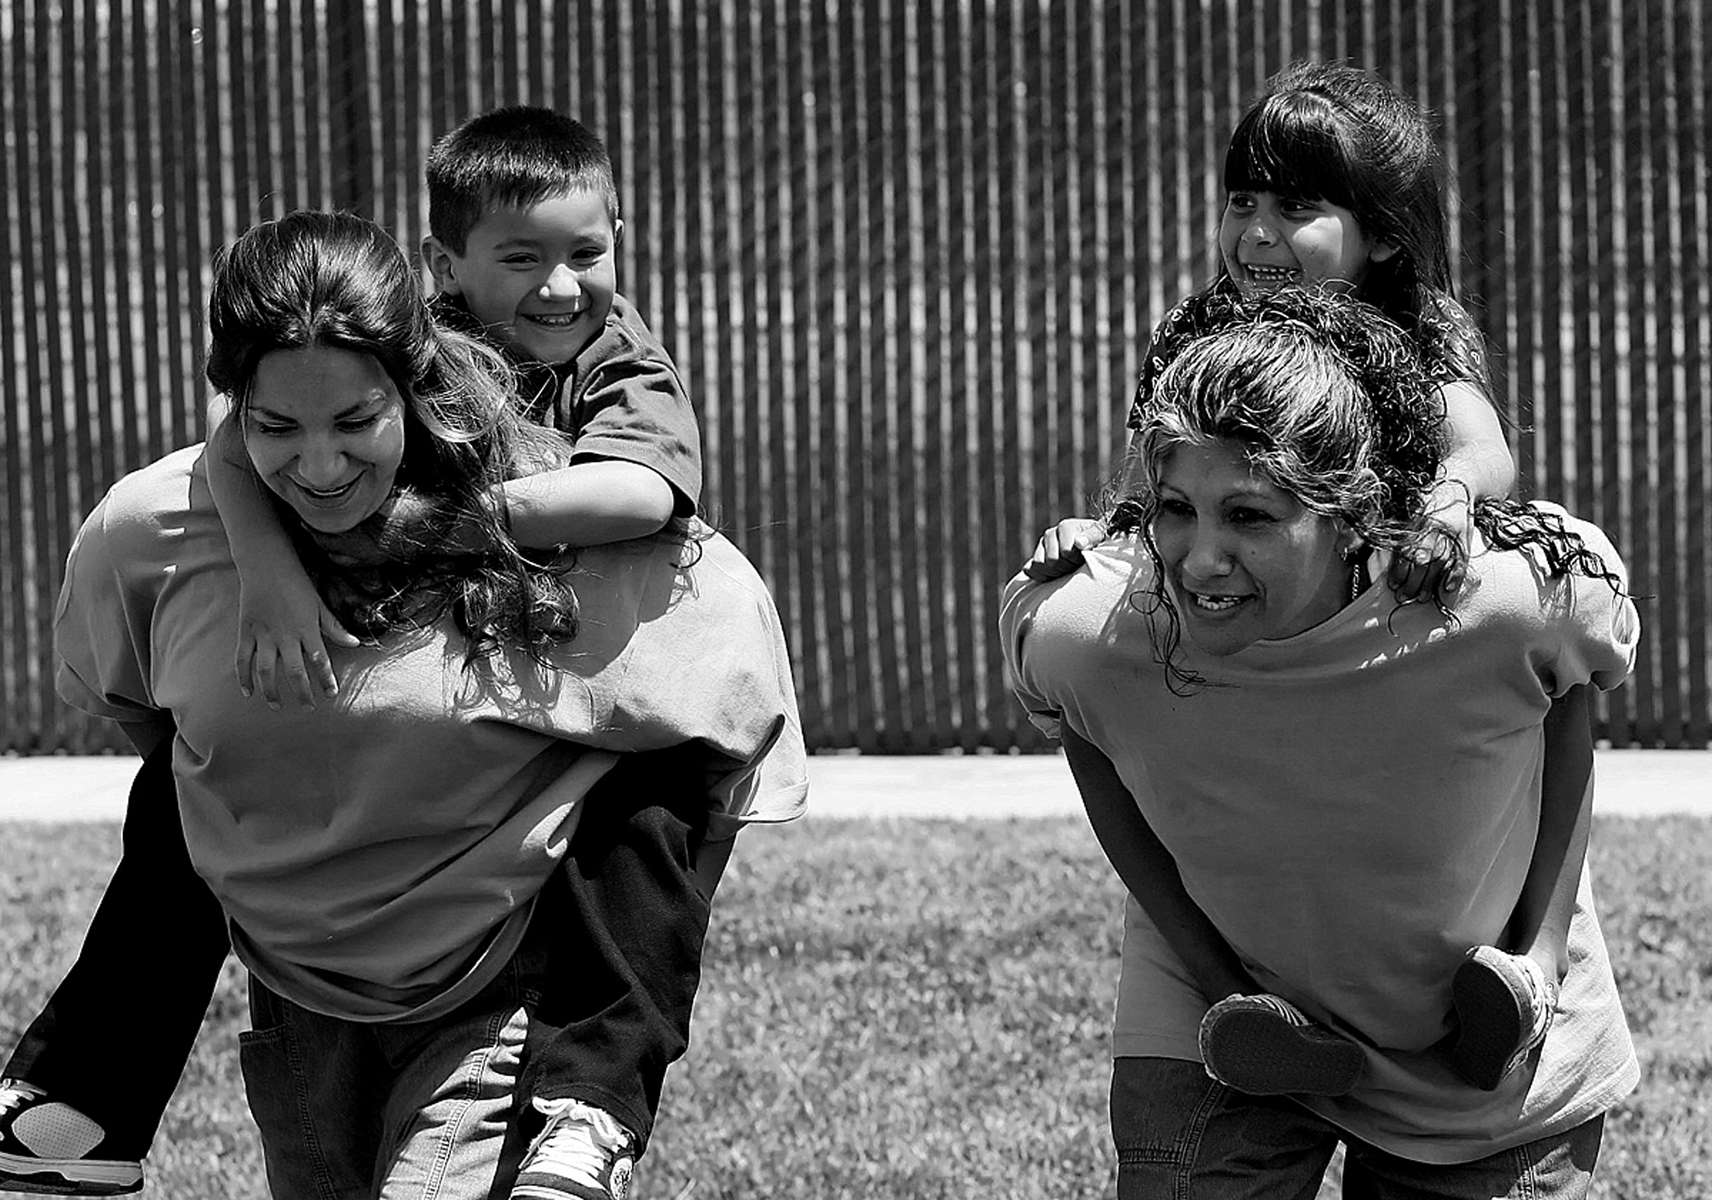 Marisol Gutierrez and her son, Jonathan Vargas, 6, of Los Angeles, Calif., left, play around with Antonia Salazar and her daughter, JessicaTorres of Bakersfield, Calif., during the visit to the prison. The children and their mothers had three hours to together. (The Press-Enterprise/ Mark Zaleski)